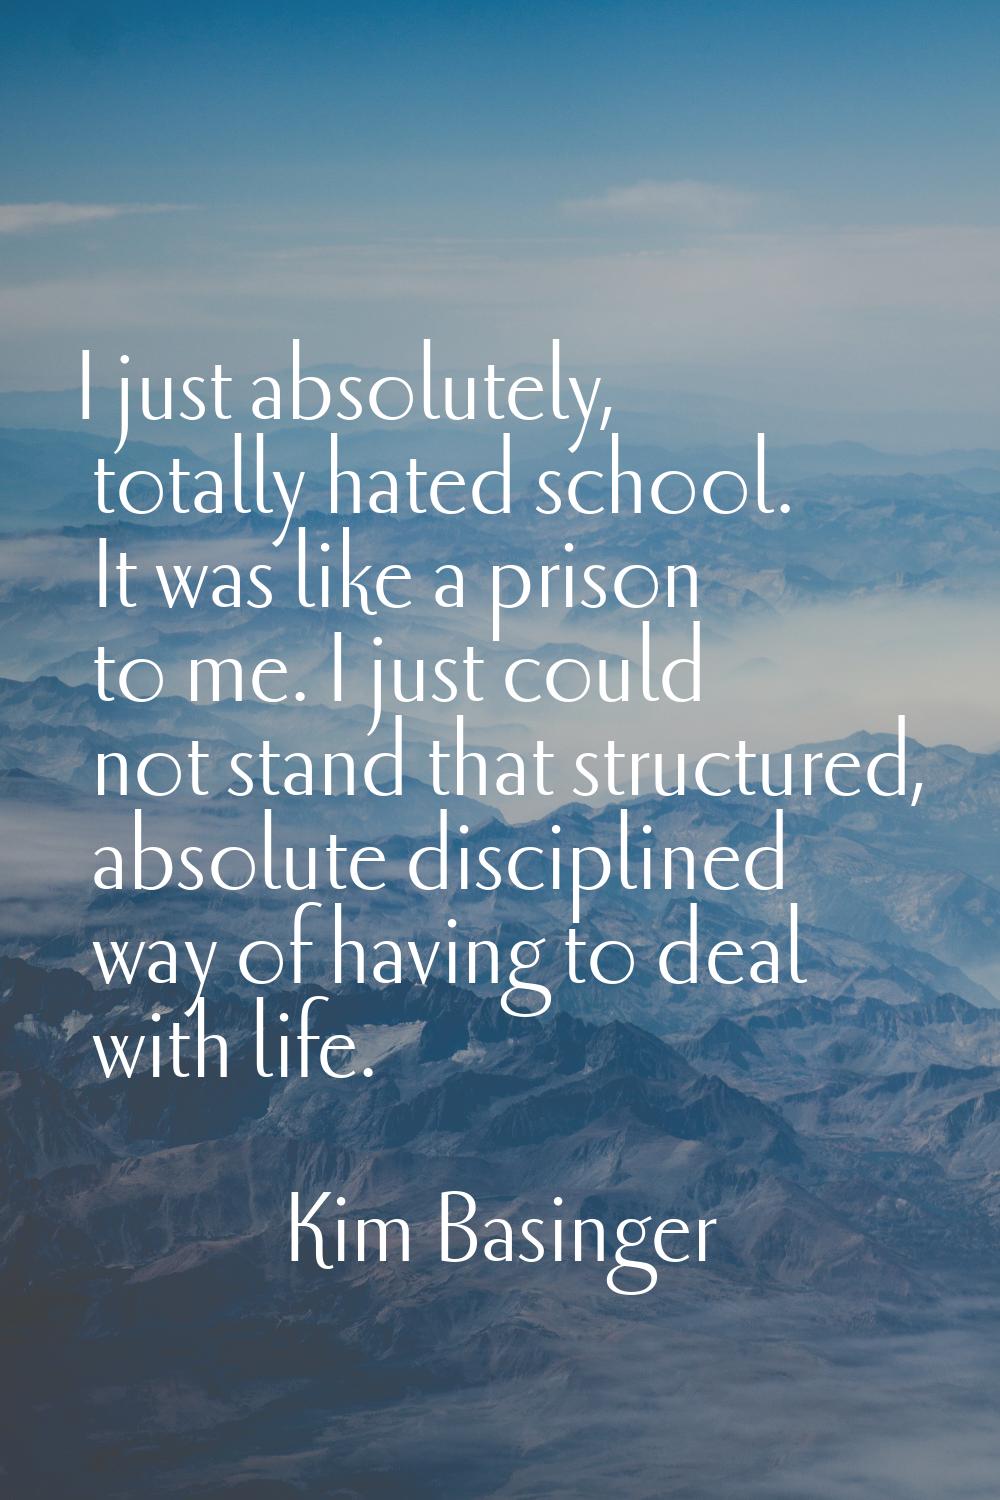 I just absolutely, totally hated school. It was like a prison to me. I just could not stand that st